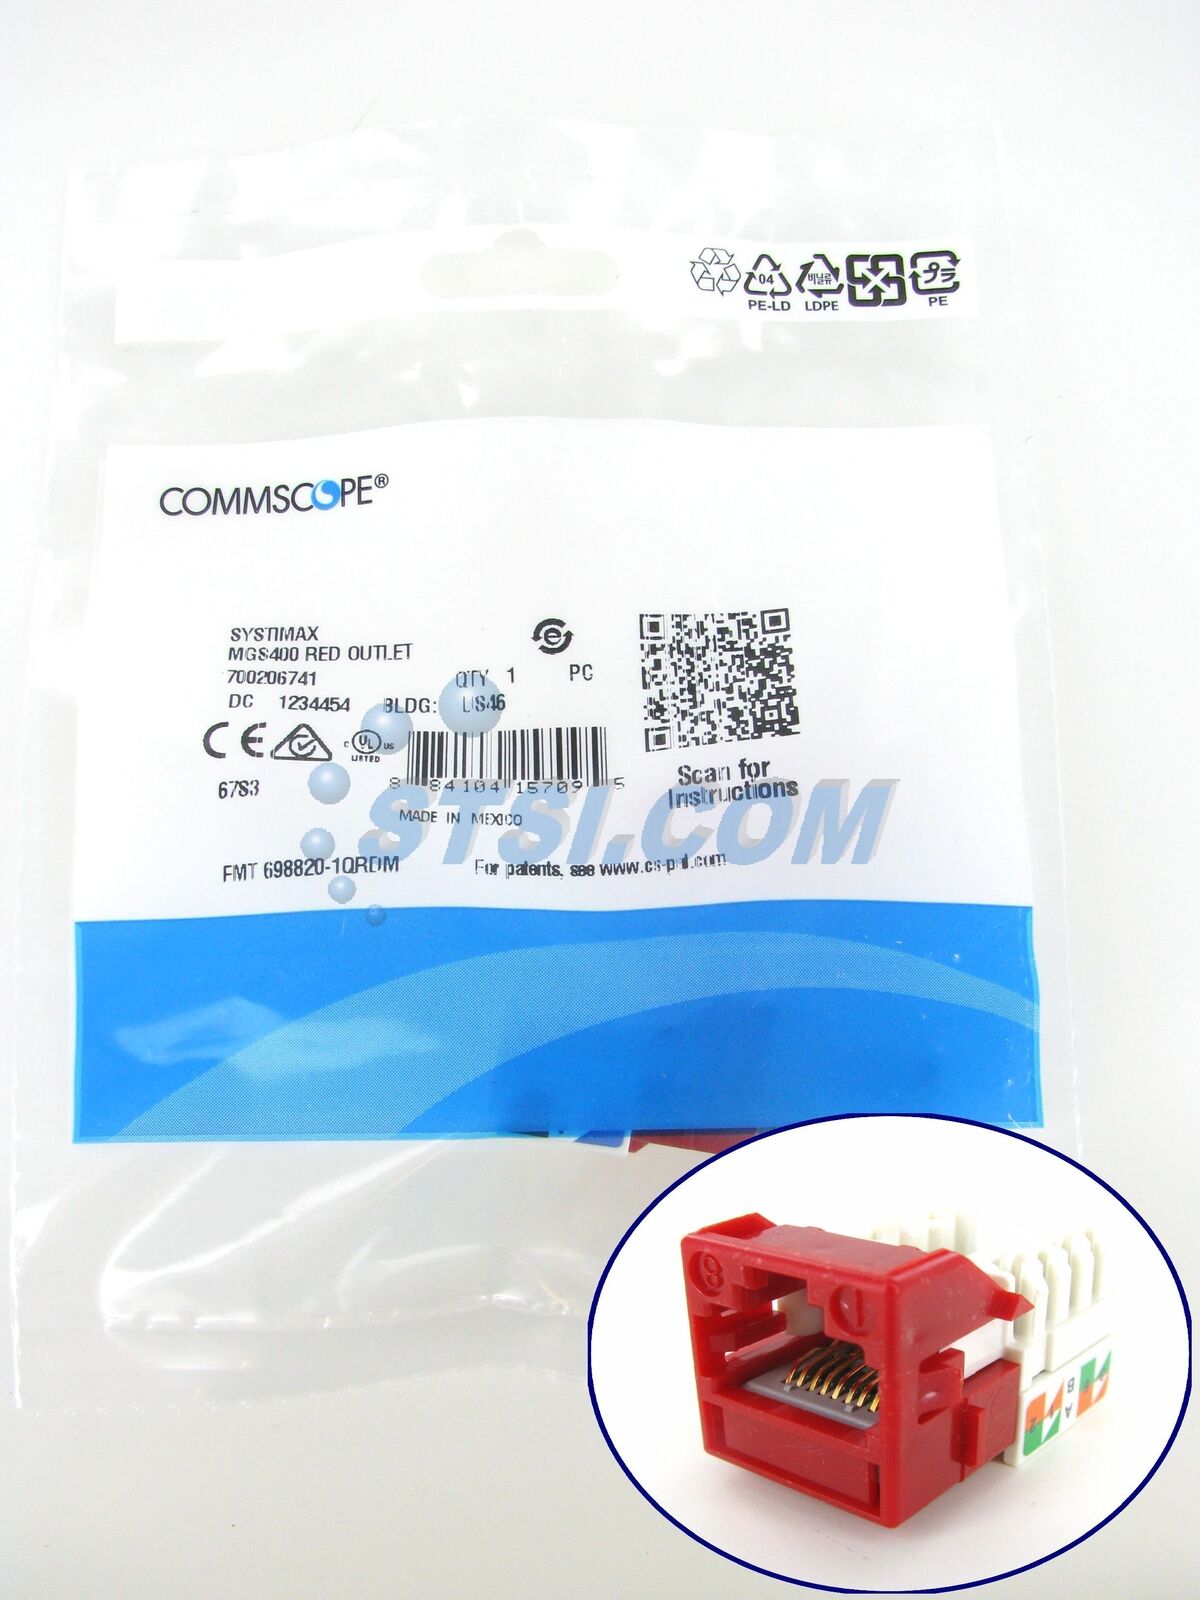 Commscope Systimax MGS400-317 GigaSpeed Cat6 Modular Jack, Red ~STSI